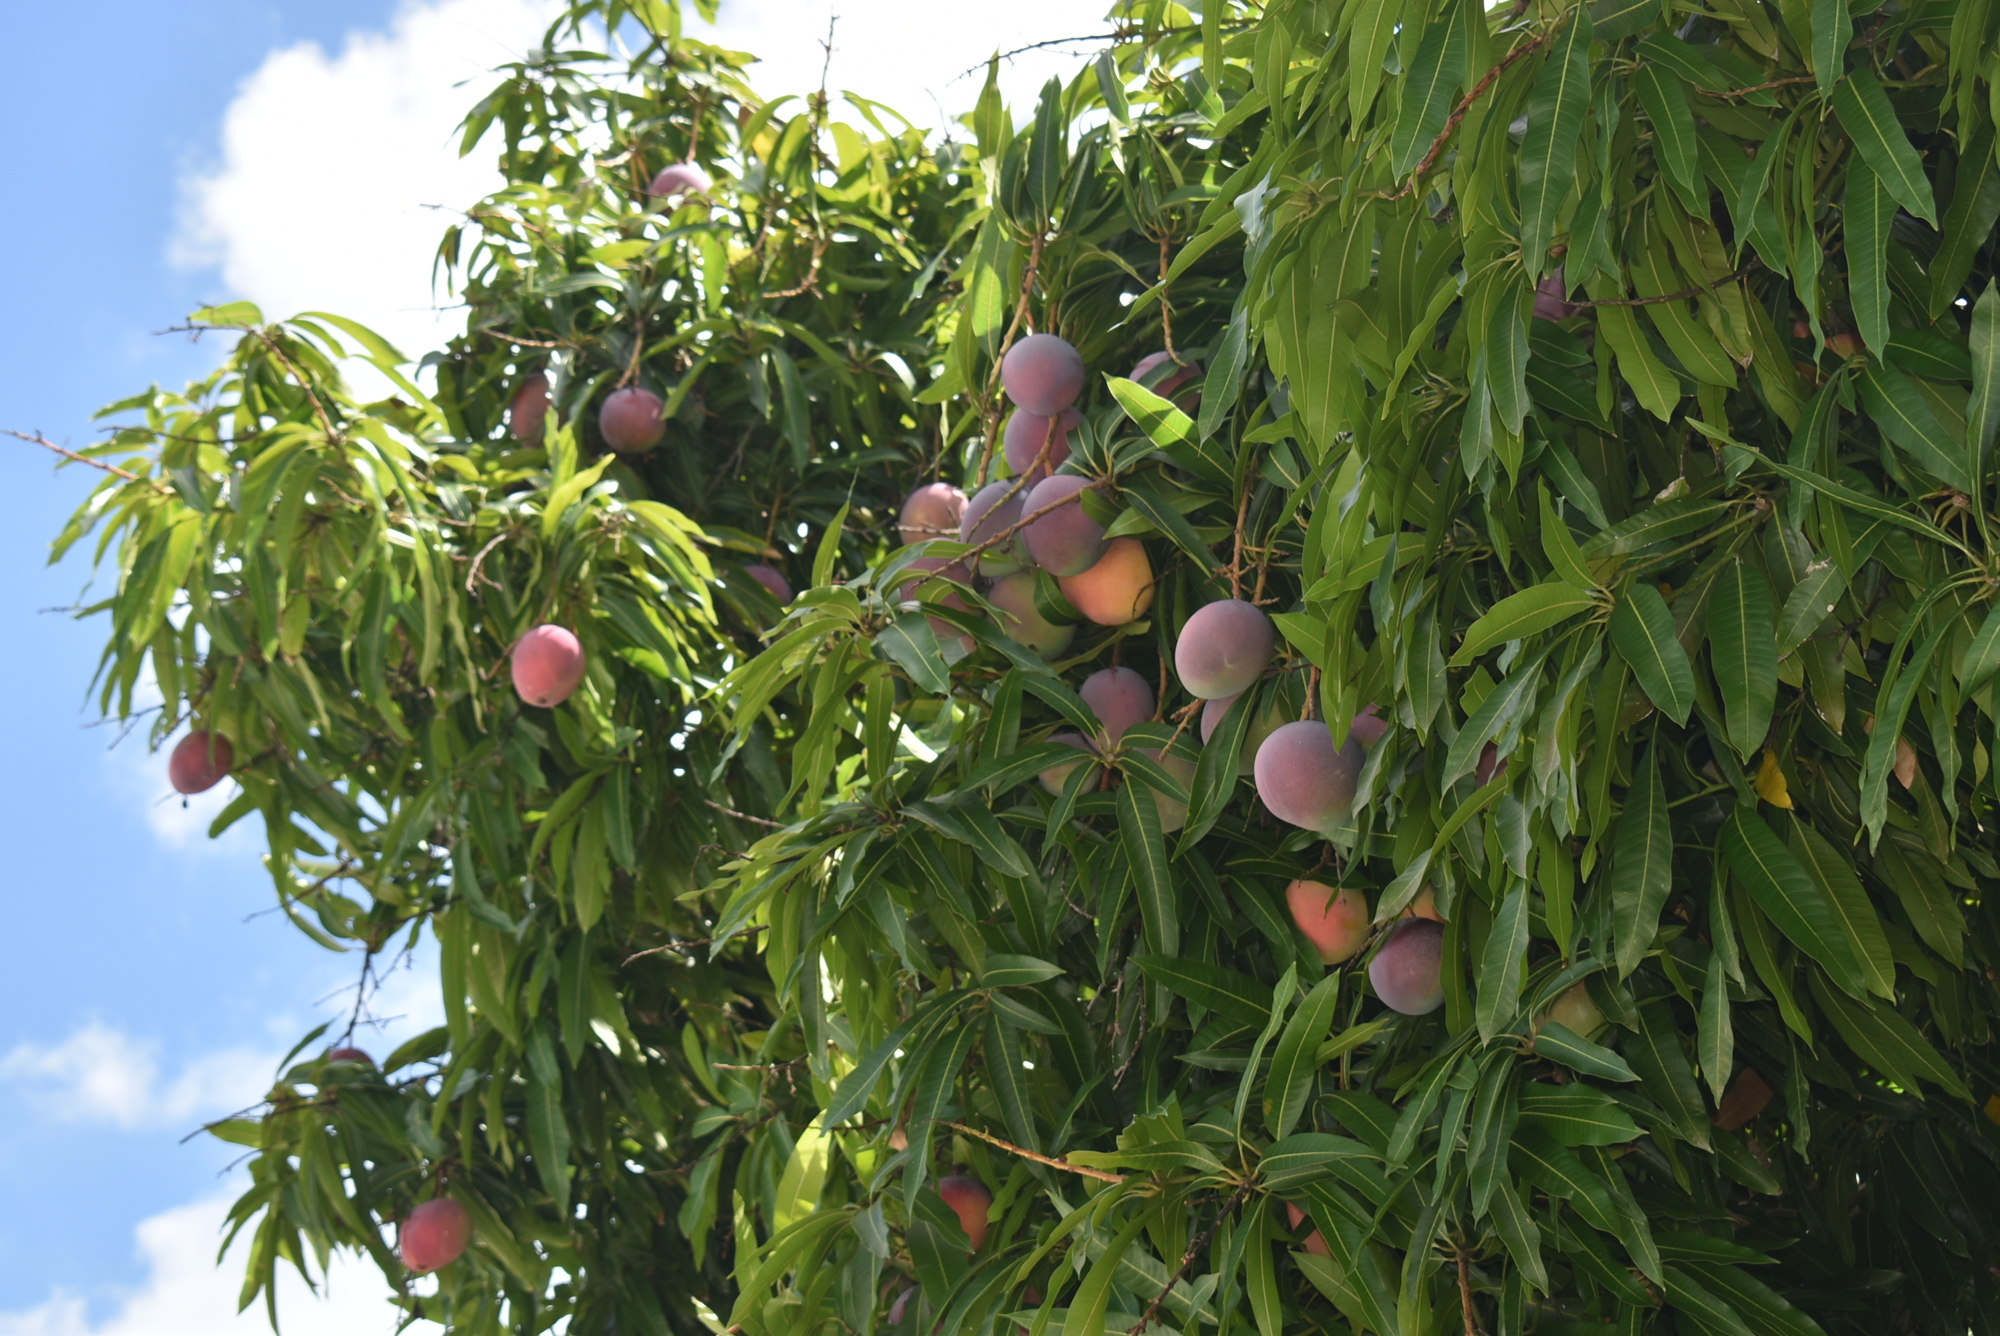 Mangoes cluster up high.